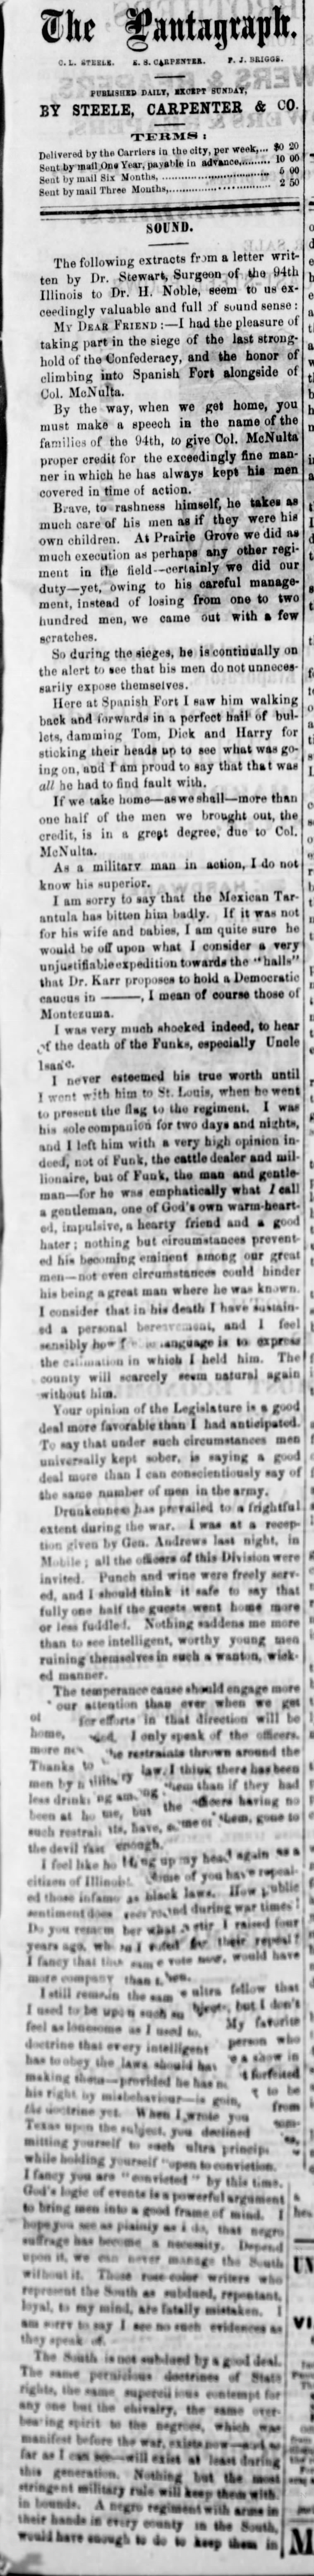 Pantagraph 24 June 1865 Letter from Dr. Stewart of 94th